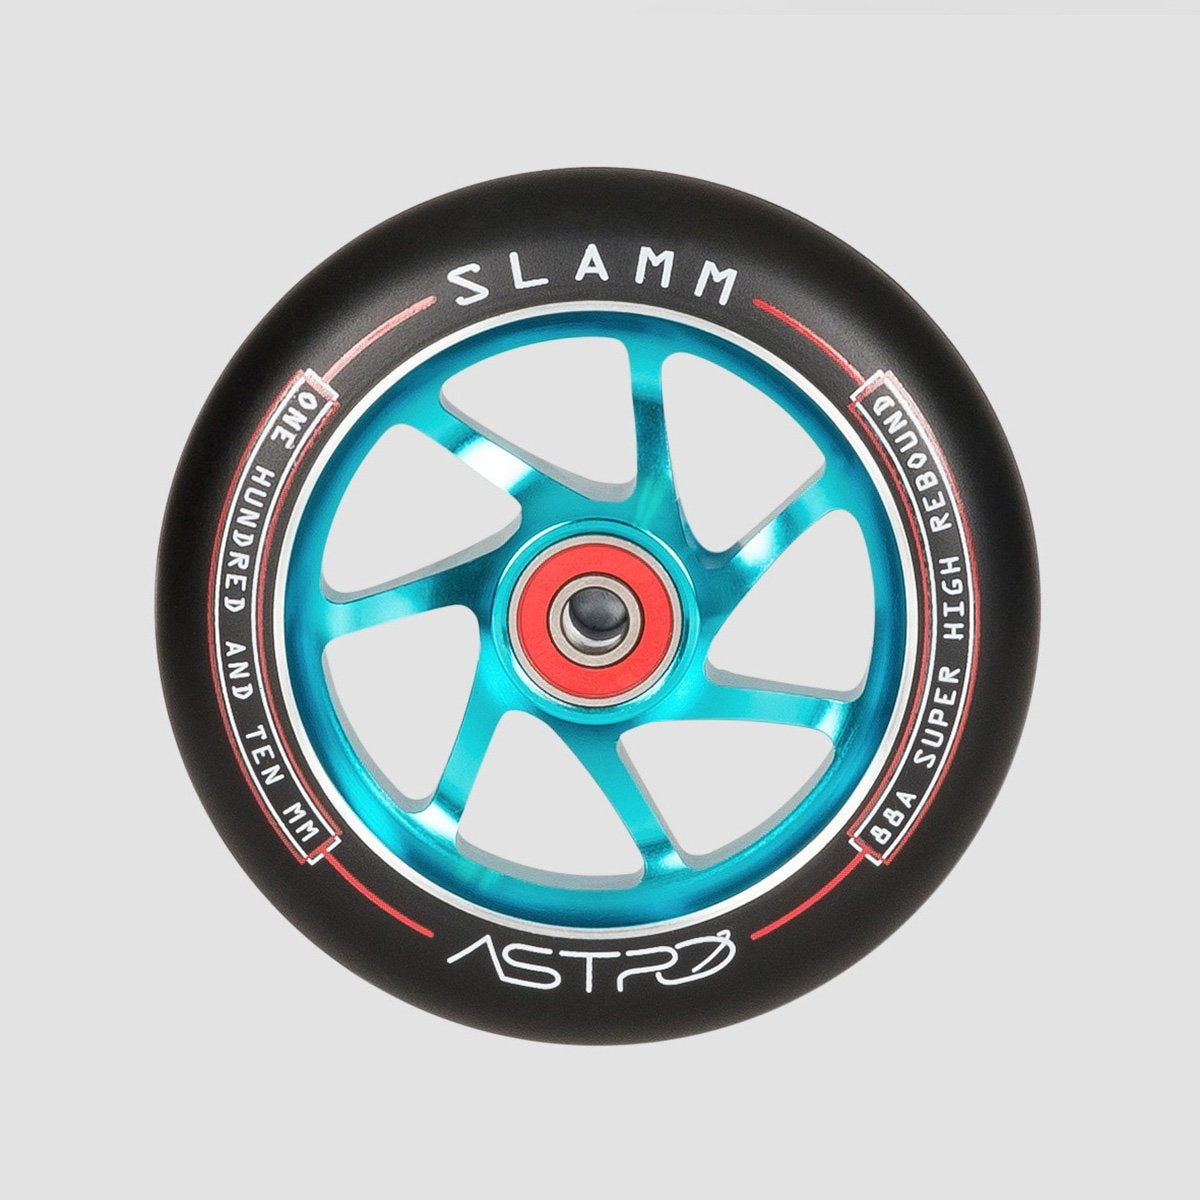 Slamm Astro Scooter Wheel x1 Blue 110mm - Scooter